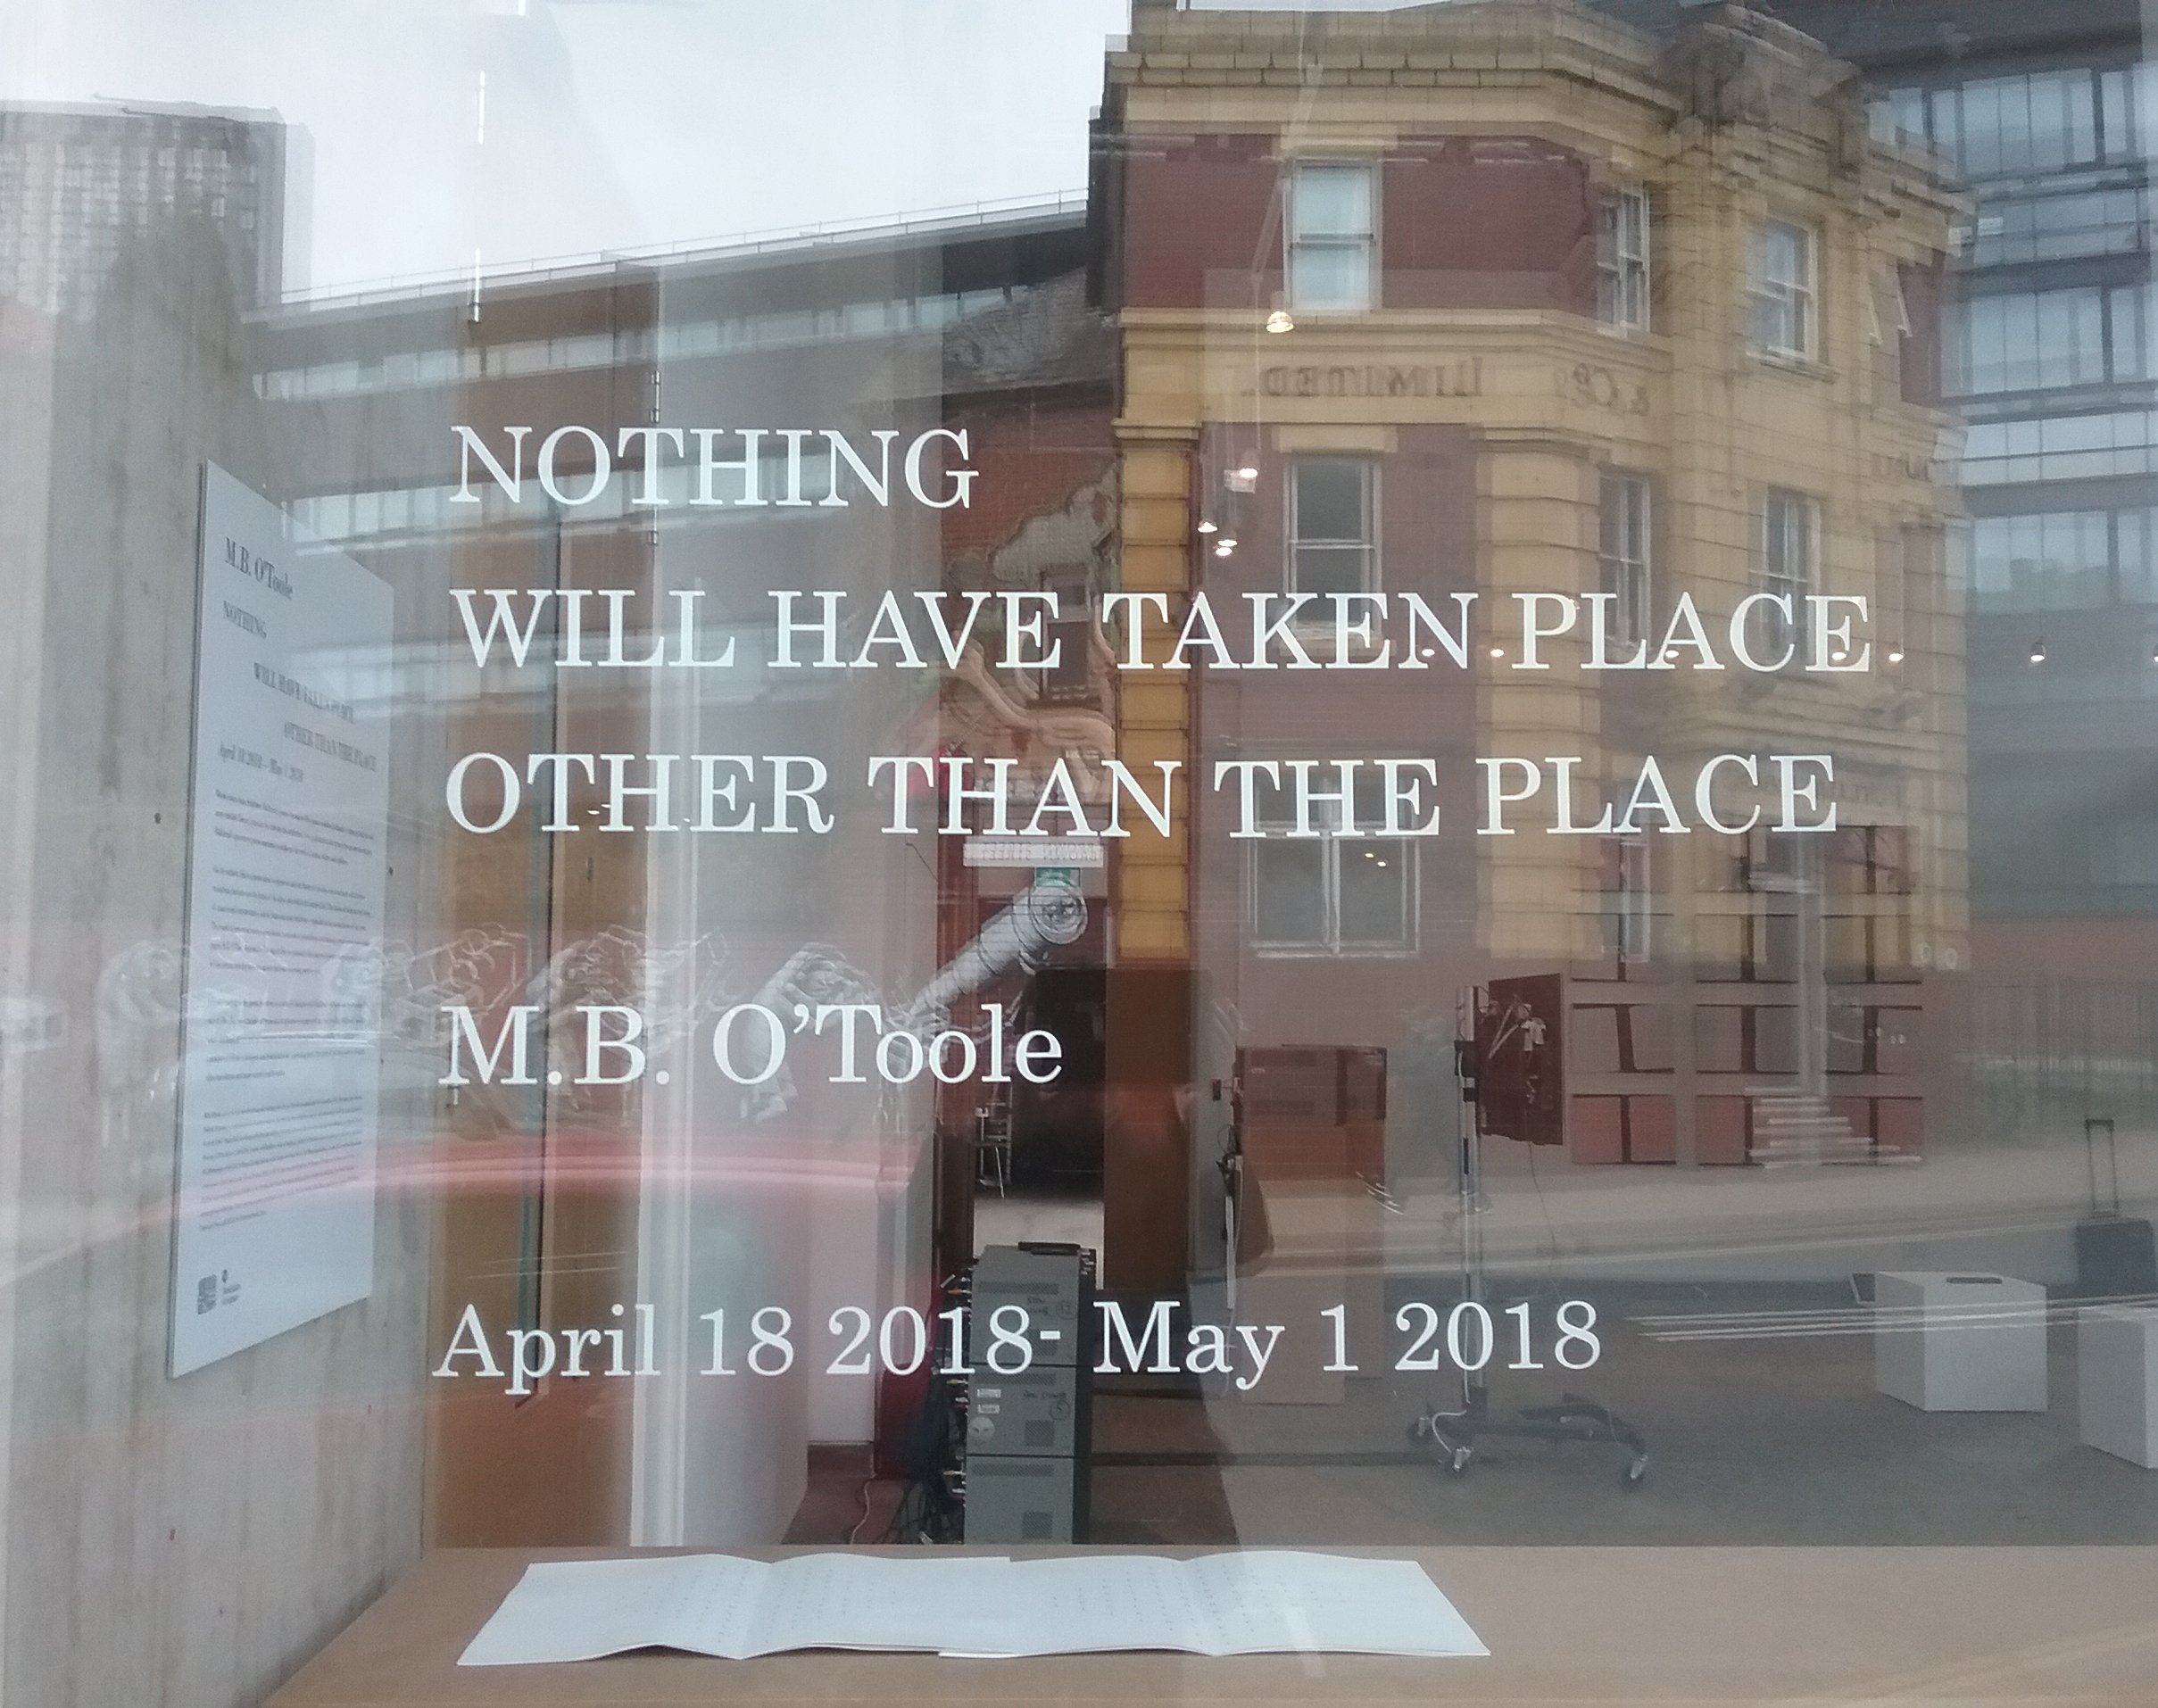 1. NOTHING WILL HAVE TAKEN PLACE OTHER THAN THE PLACE, Sheffield Institute of the Arts, hosted by Persistence Works Gallery, Yorkshire Art Space, Sheffield, 2018.jpg